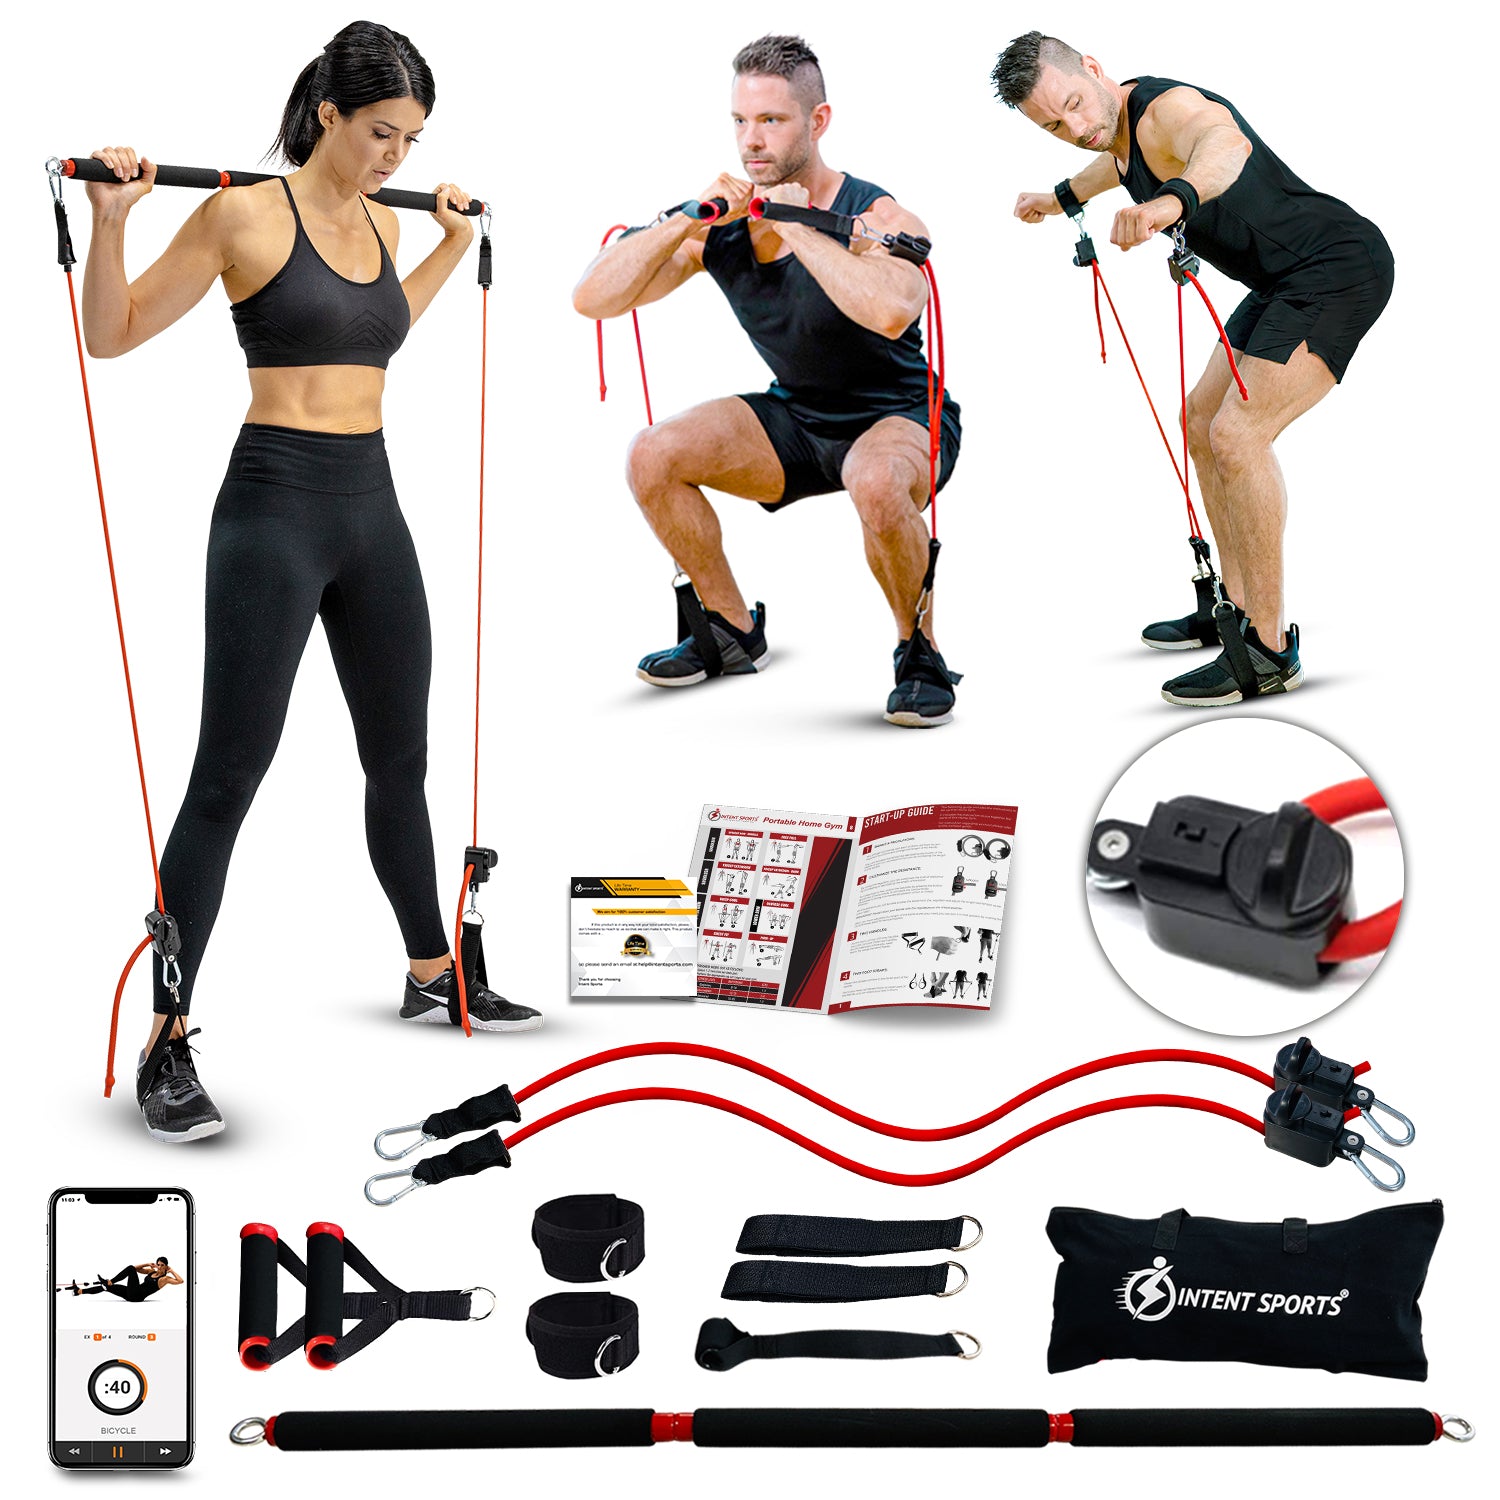 Portable Home Gym, Best Home Workout Equipment